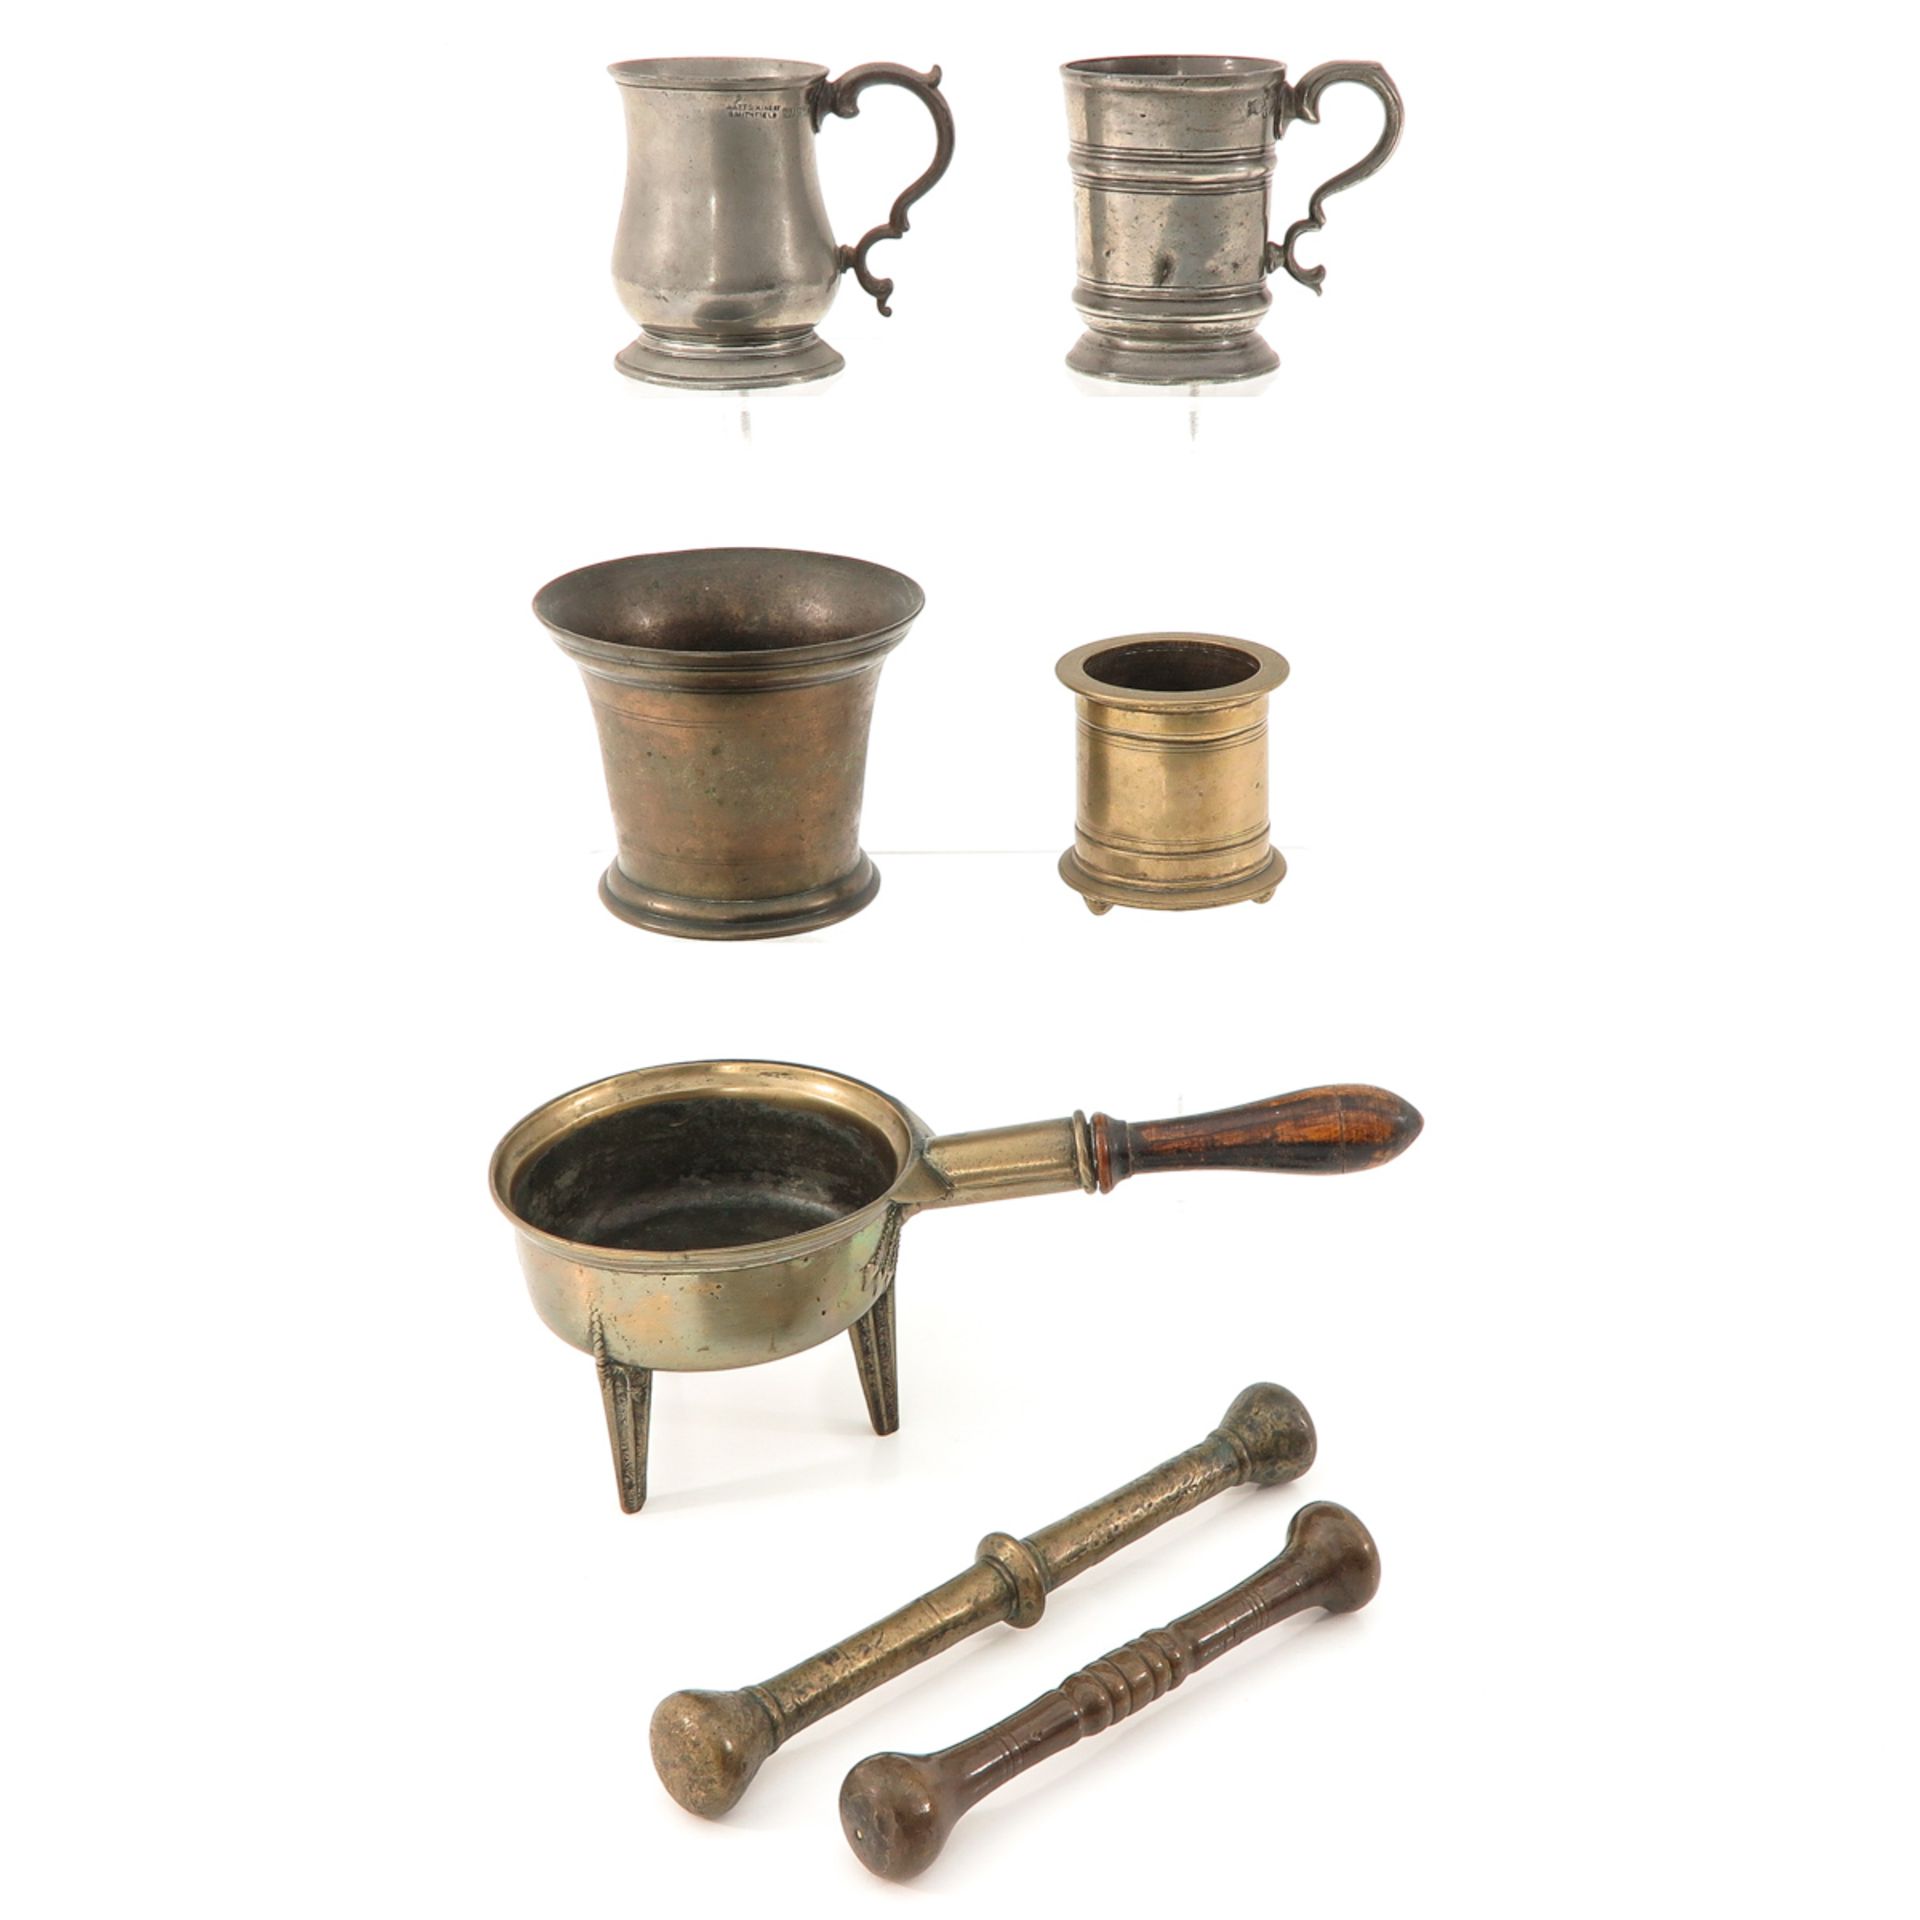 A Collection of Copper and Pewter